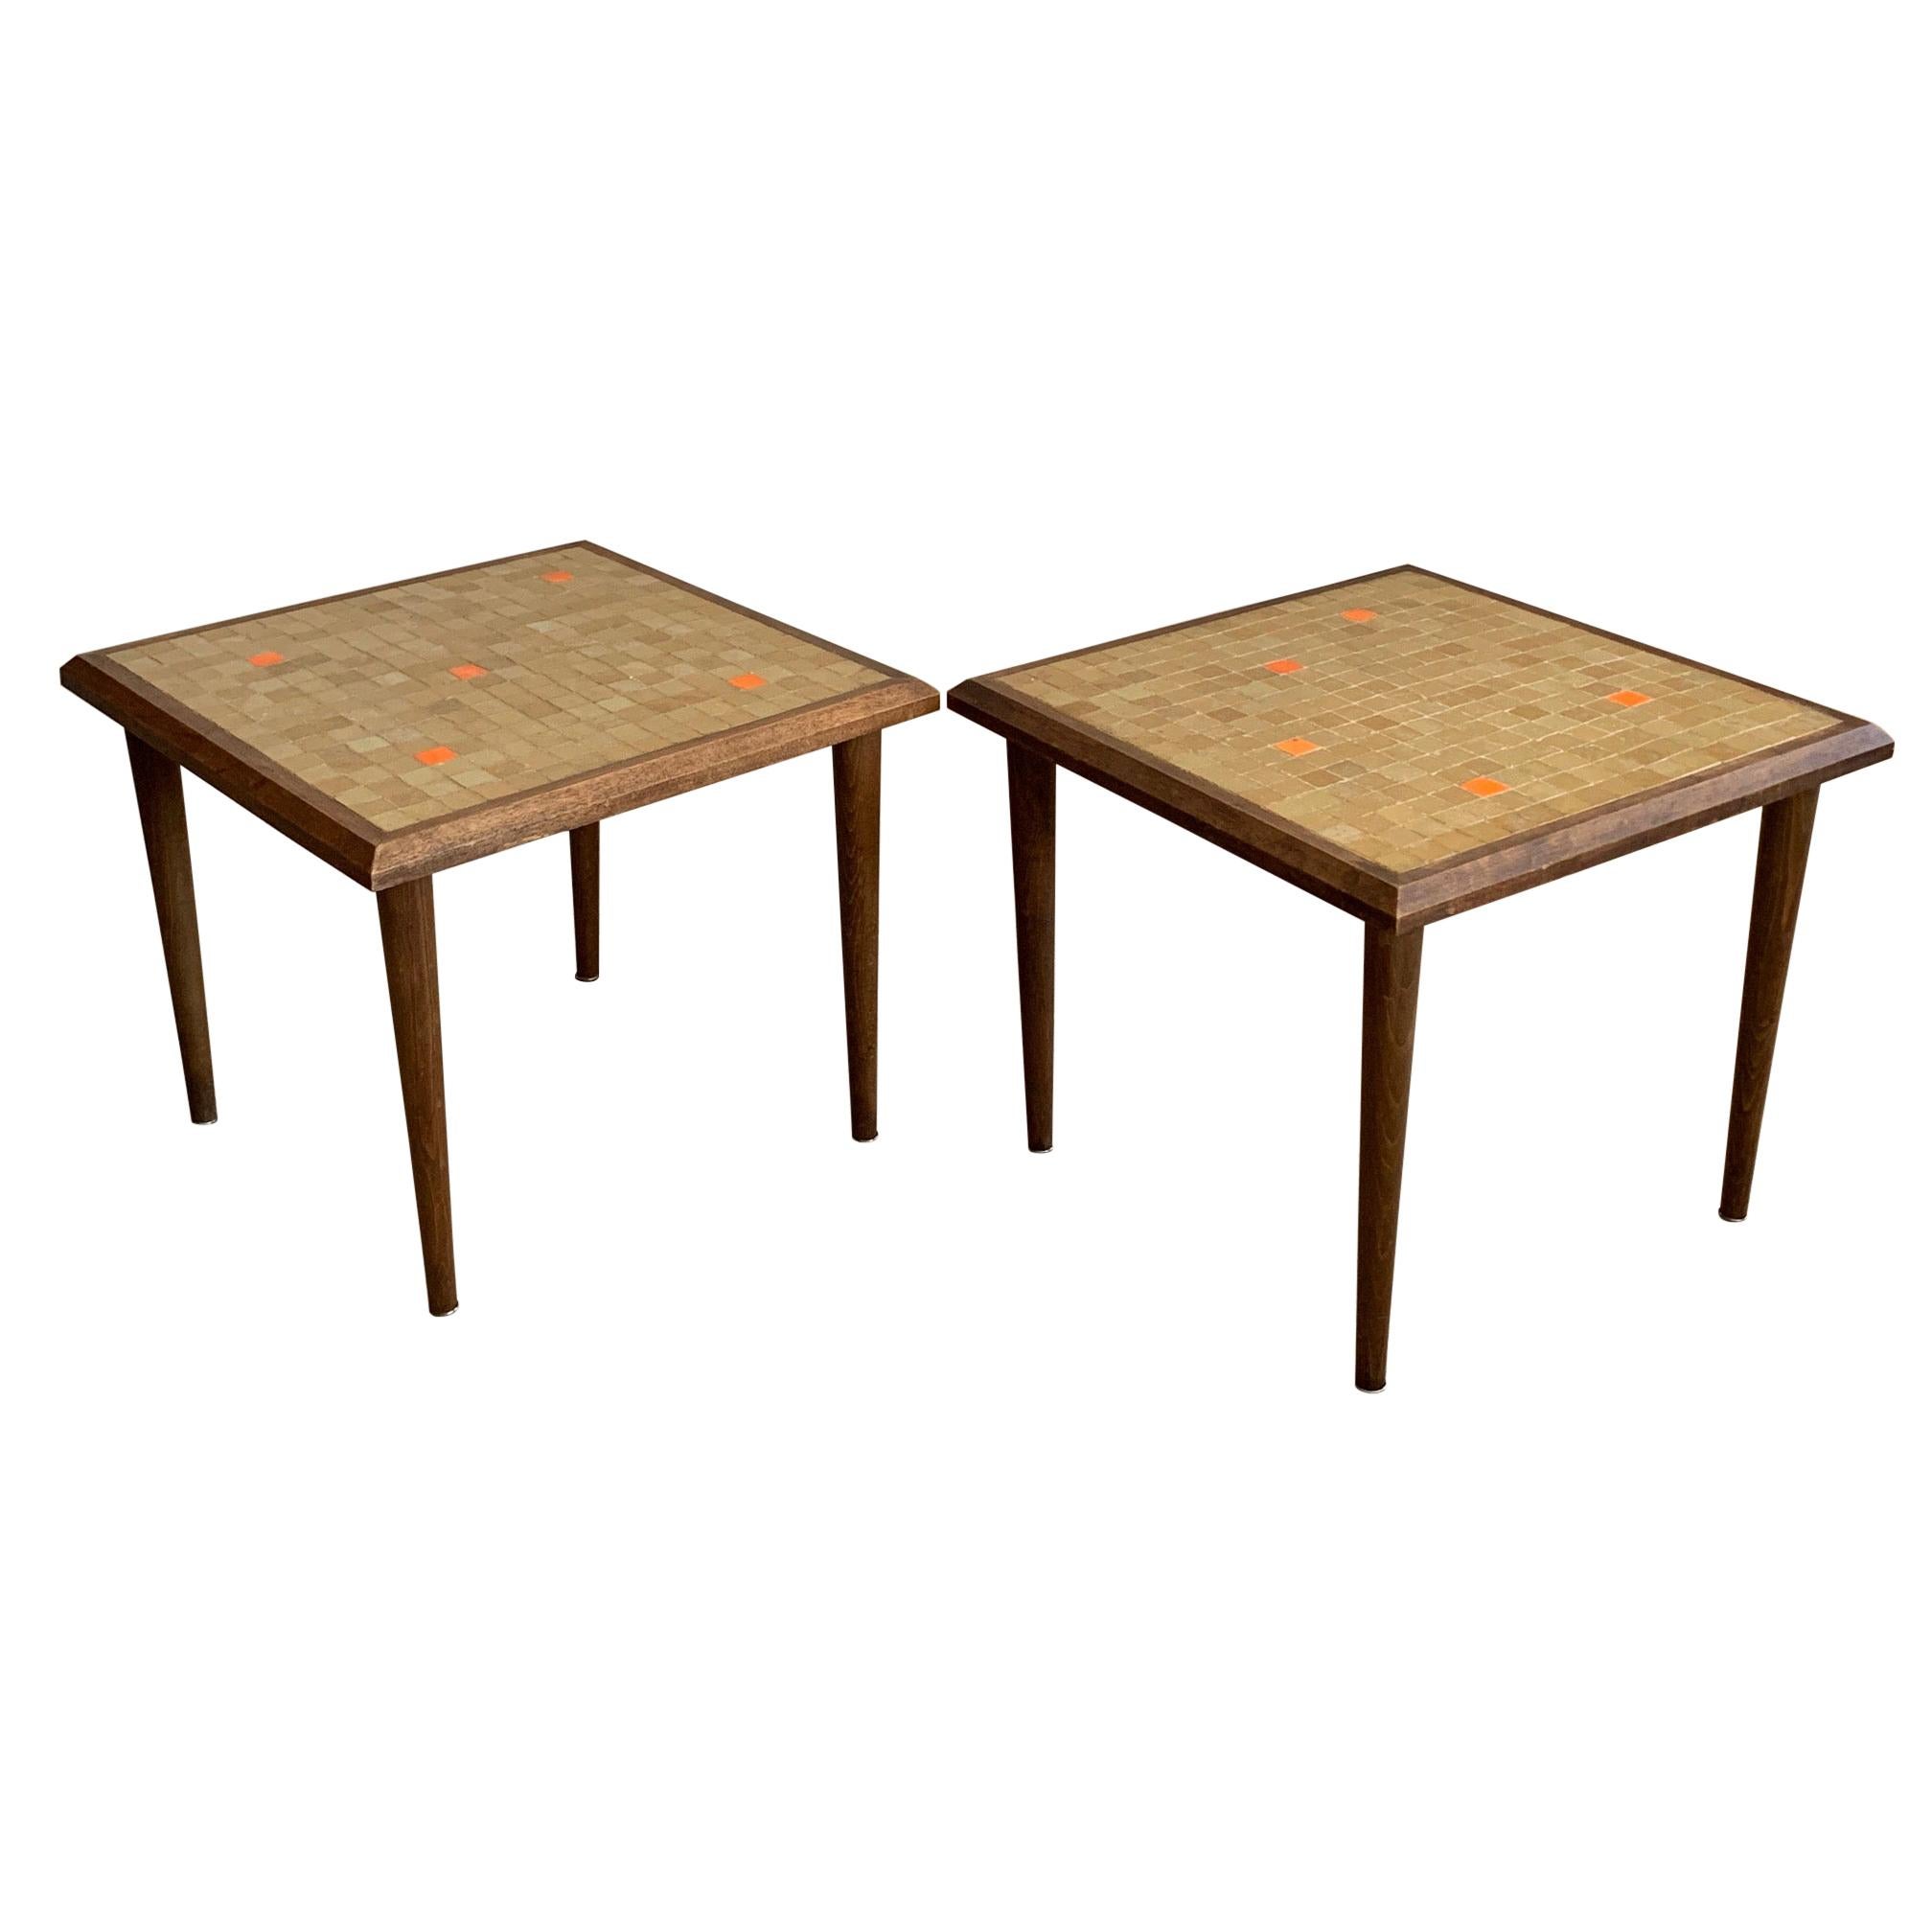 Pair of Murano Tile Side Tables